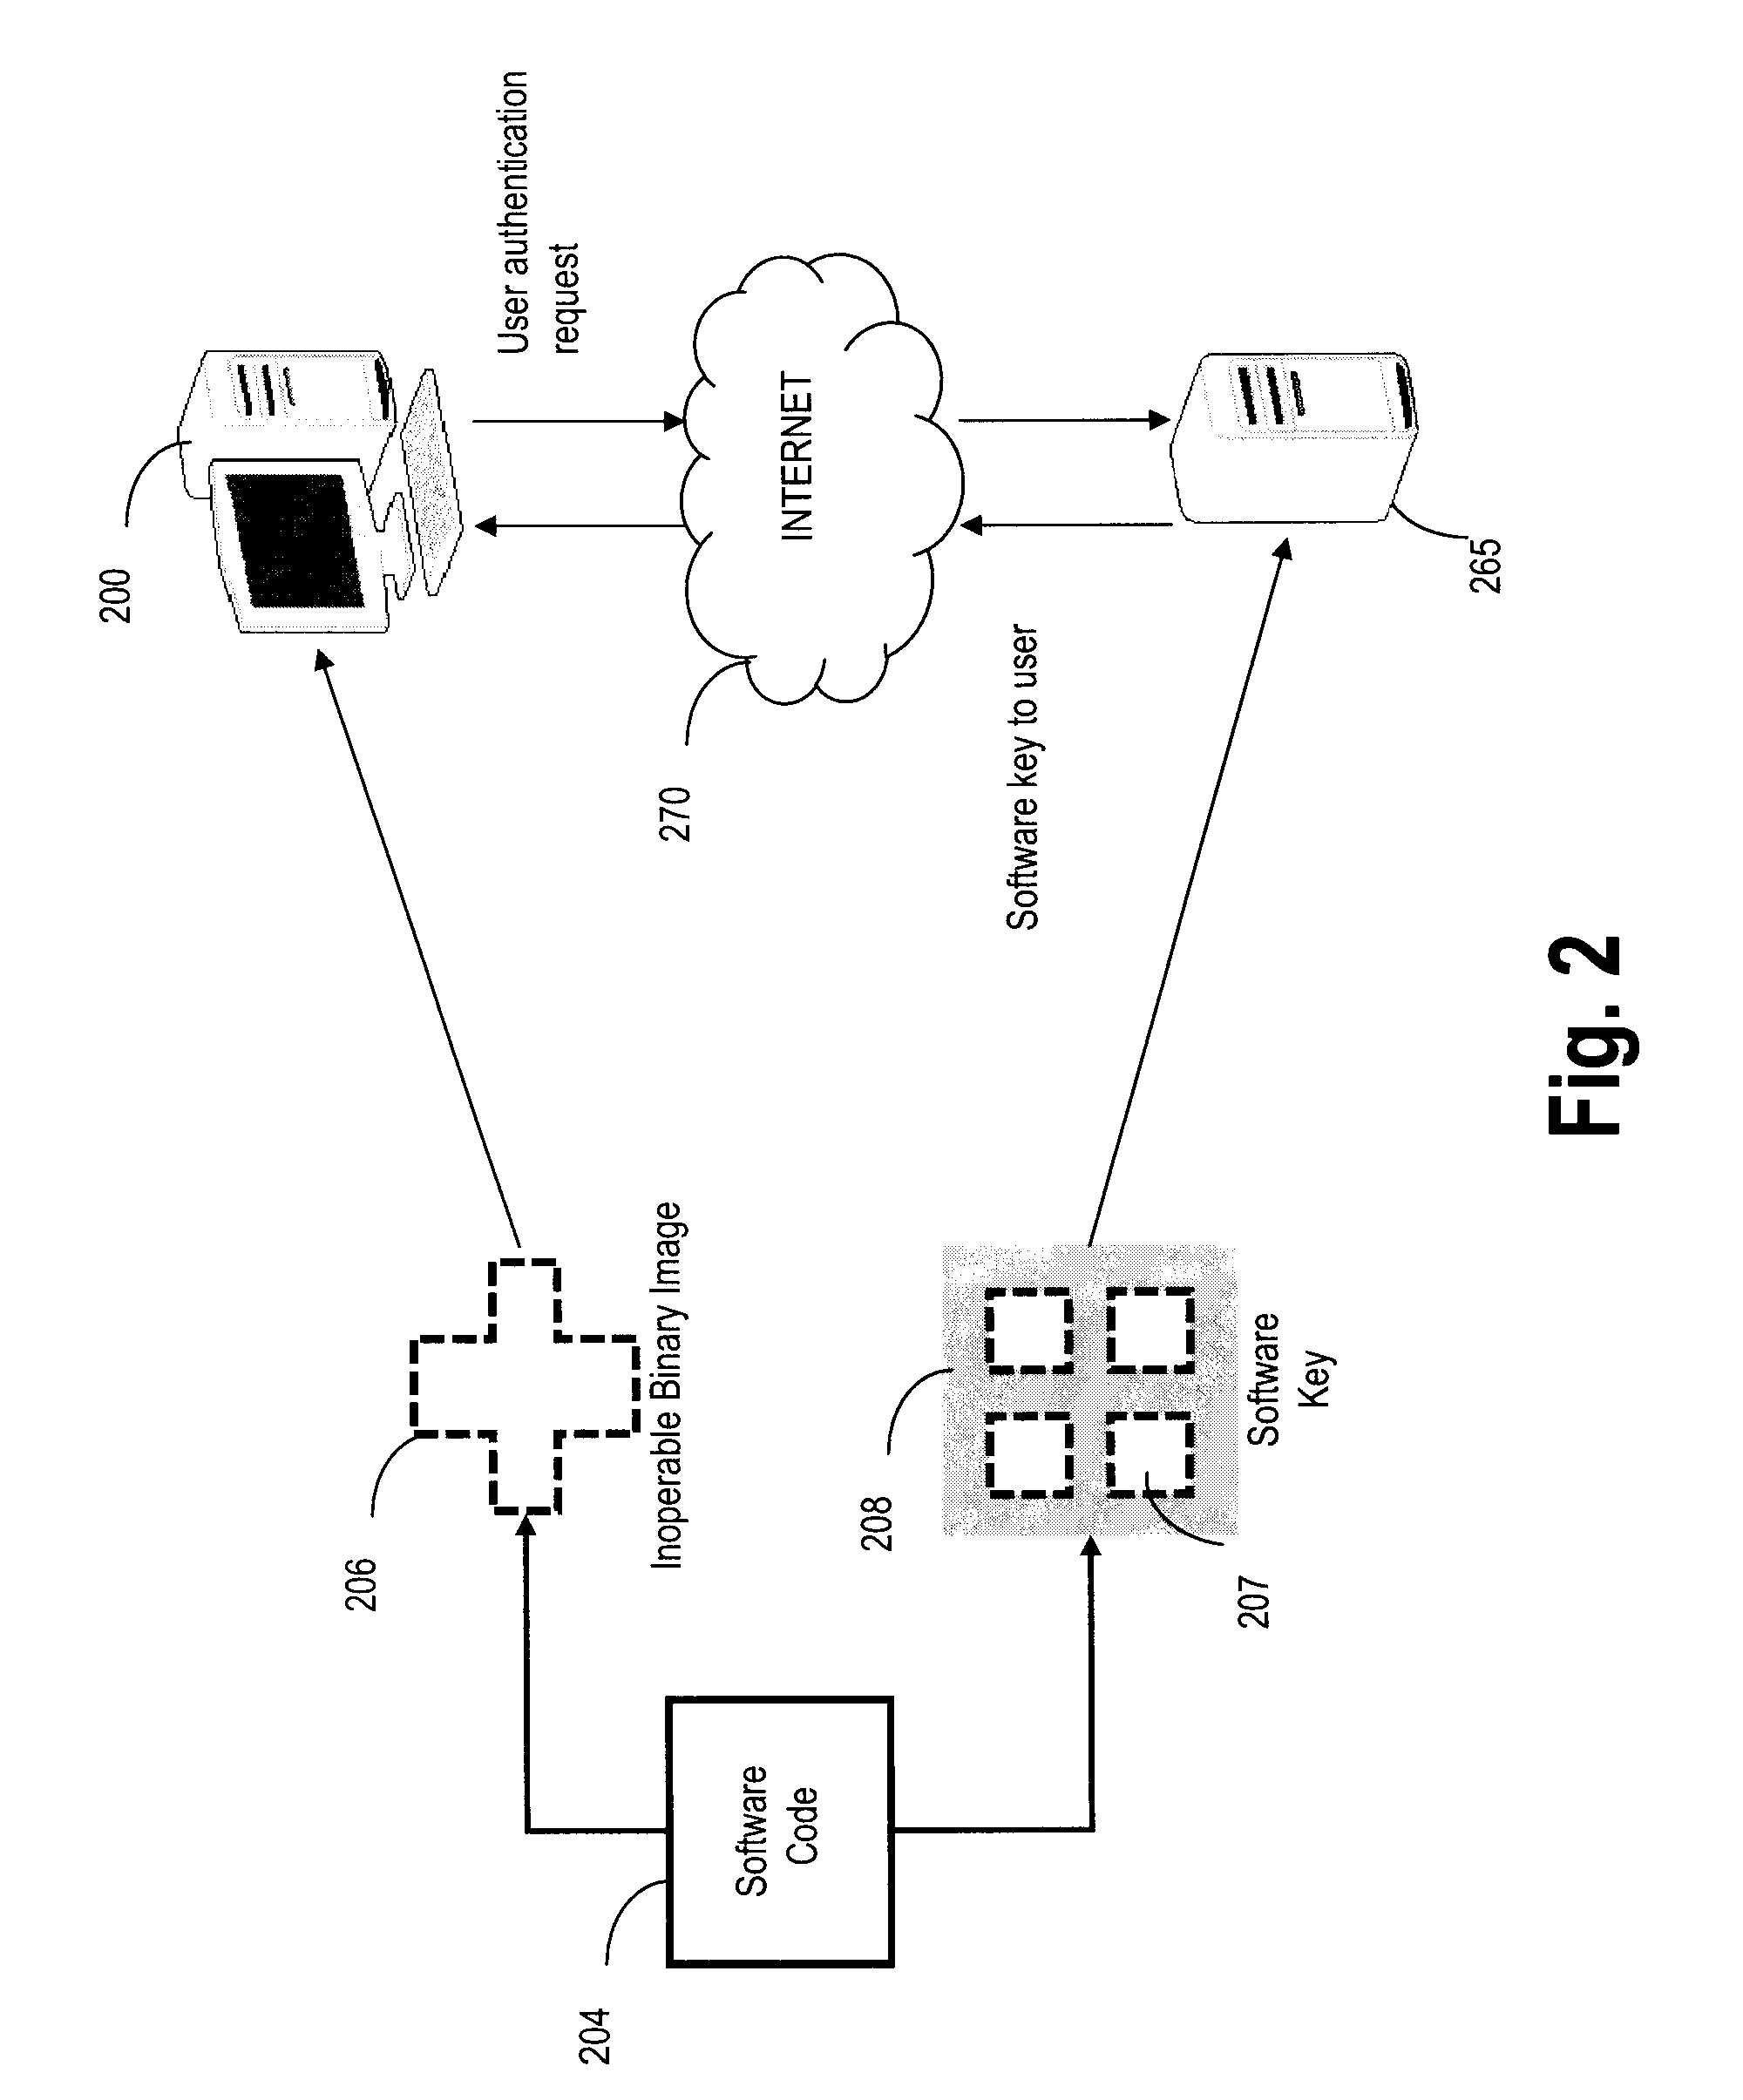 Method, System and Computer Program Product for Preventing Execution of Pirated Software